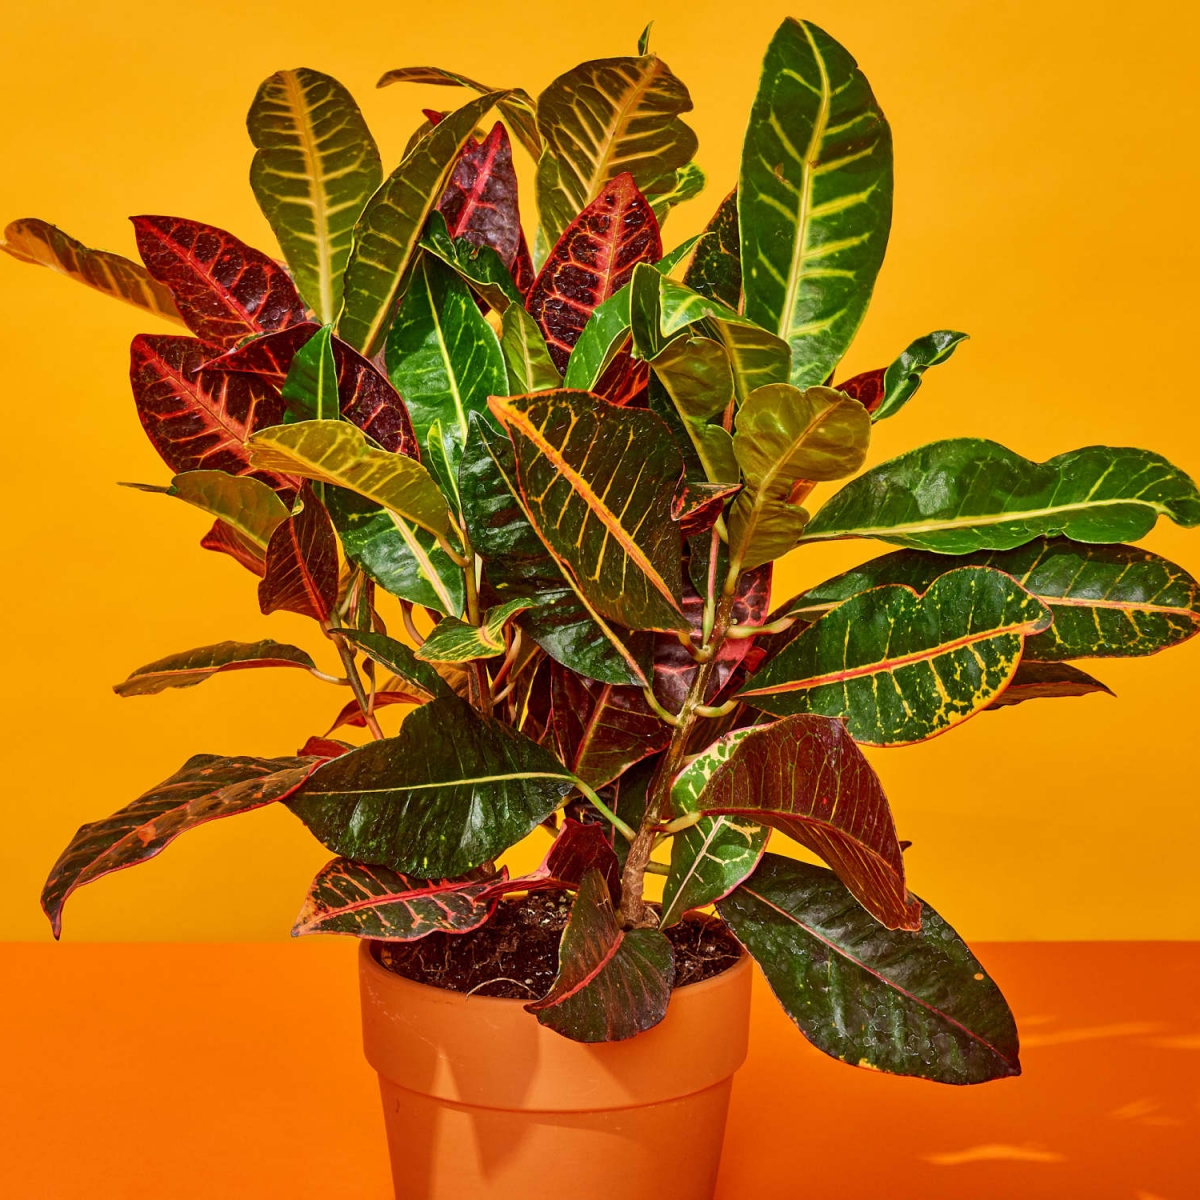 Fall Houseplants – 7 Plants to Elevate Your Autumn Decor